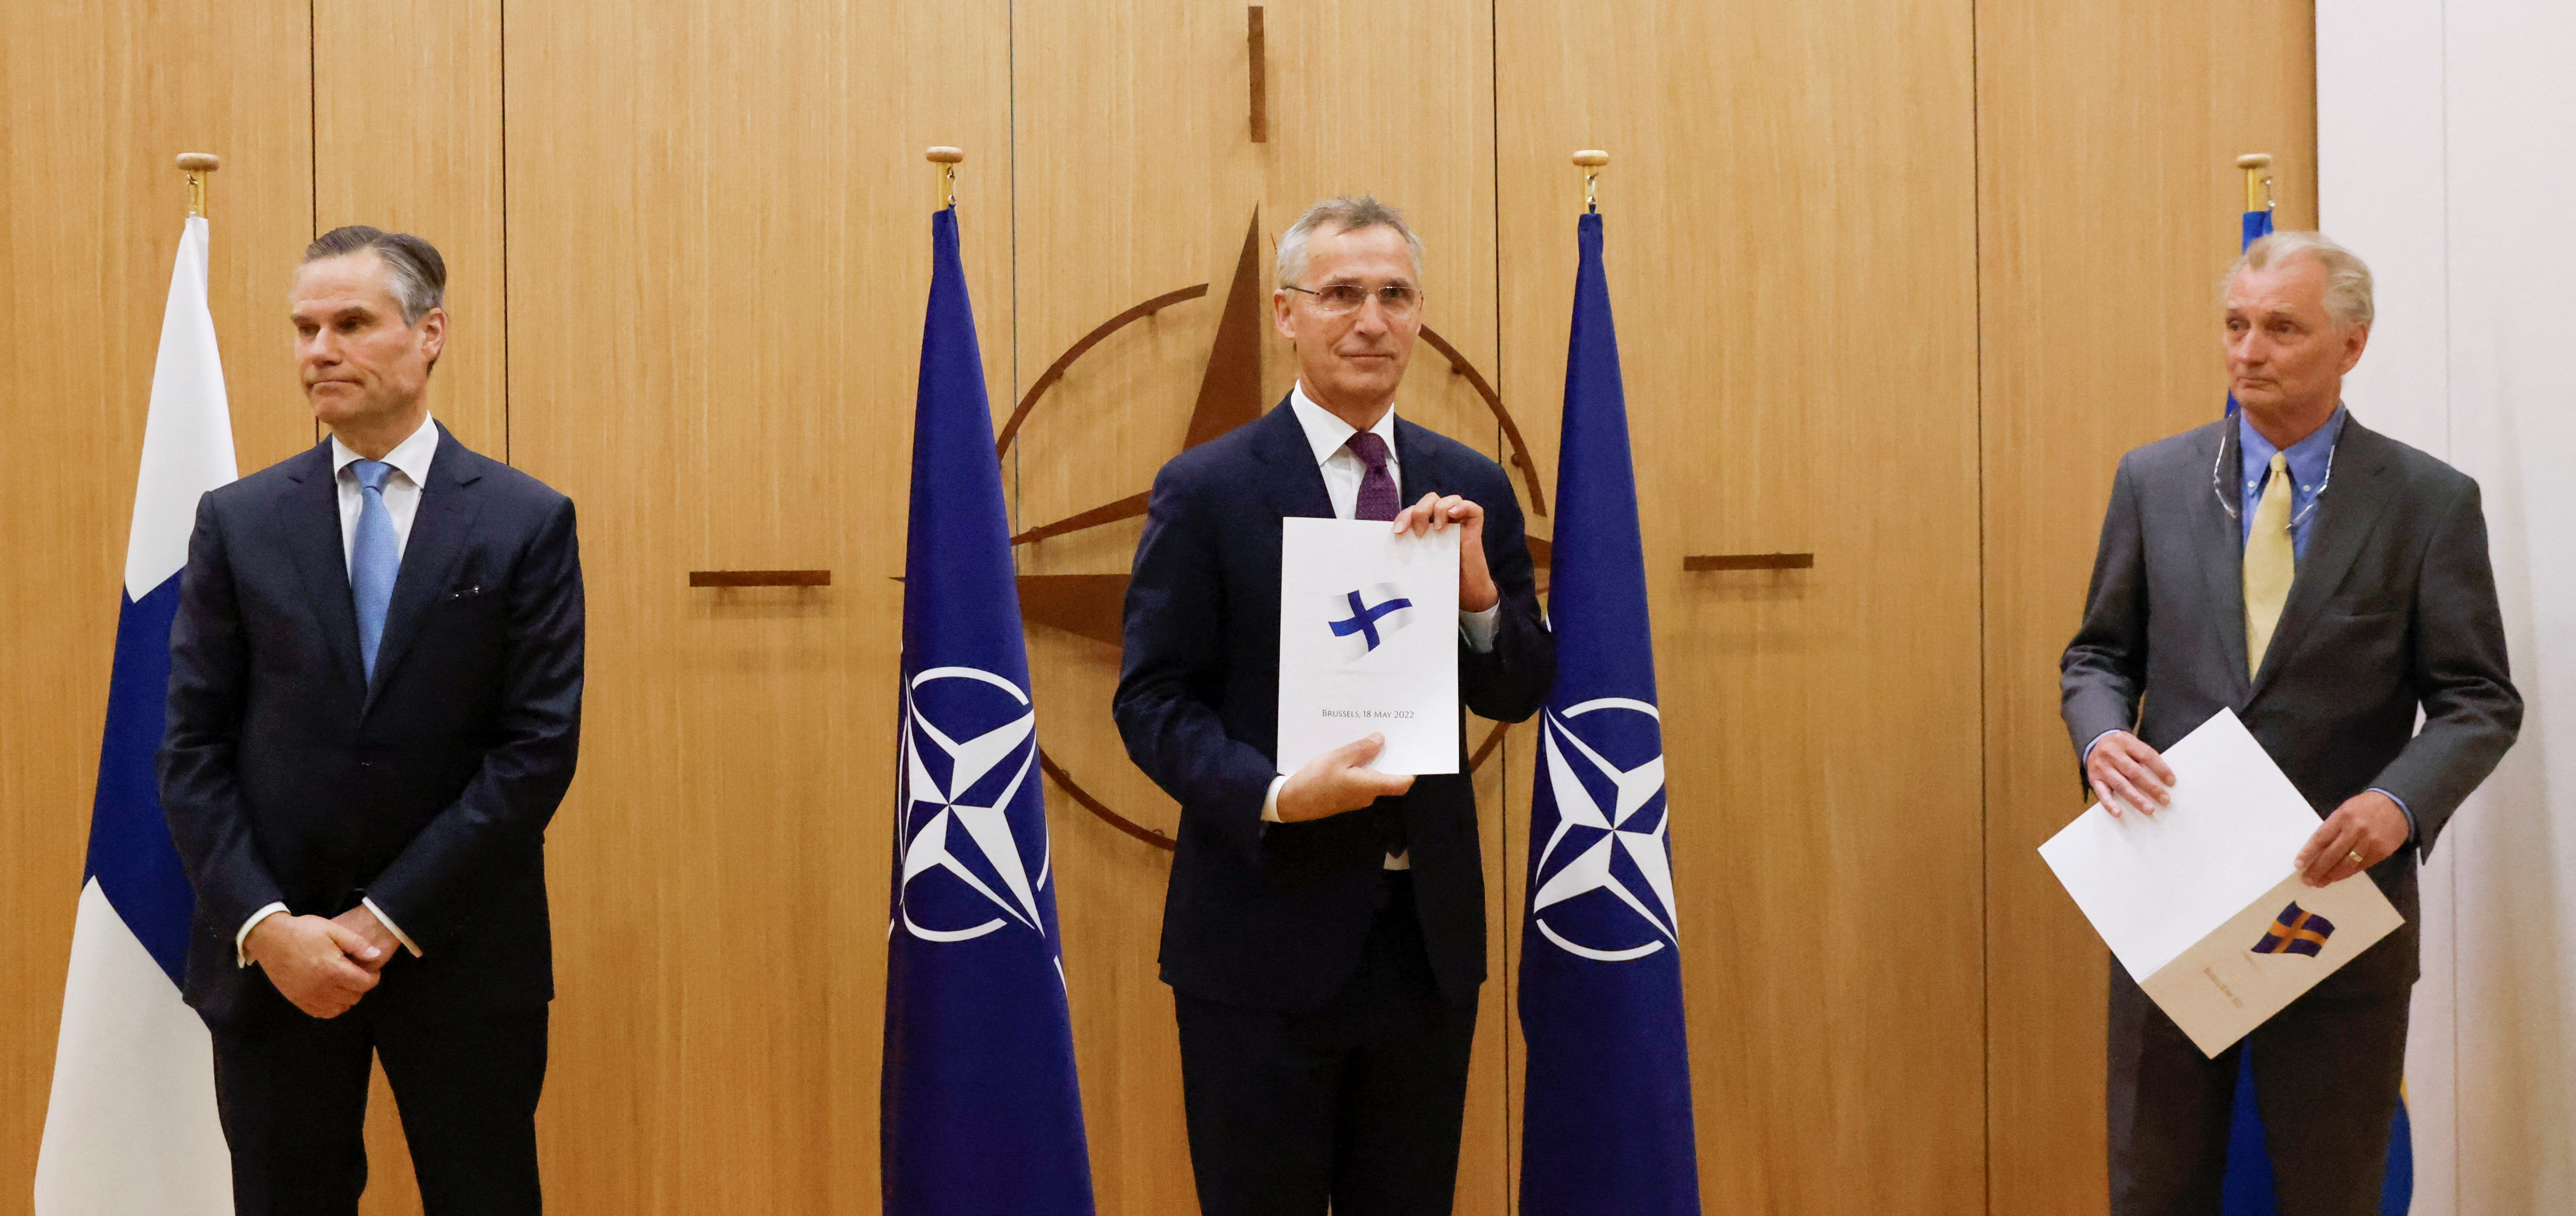 Finland to formally join NATO on April 4: president office